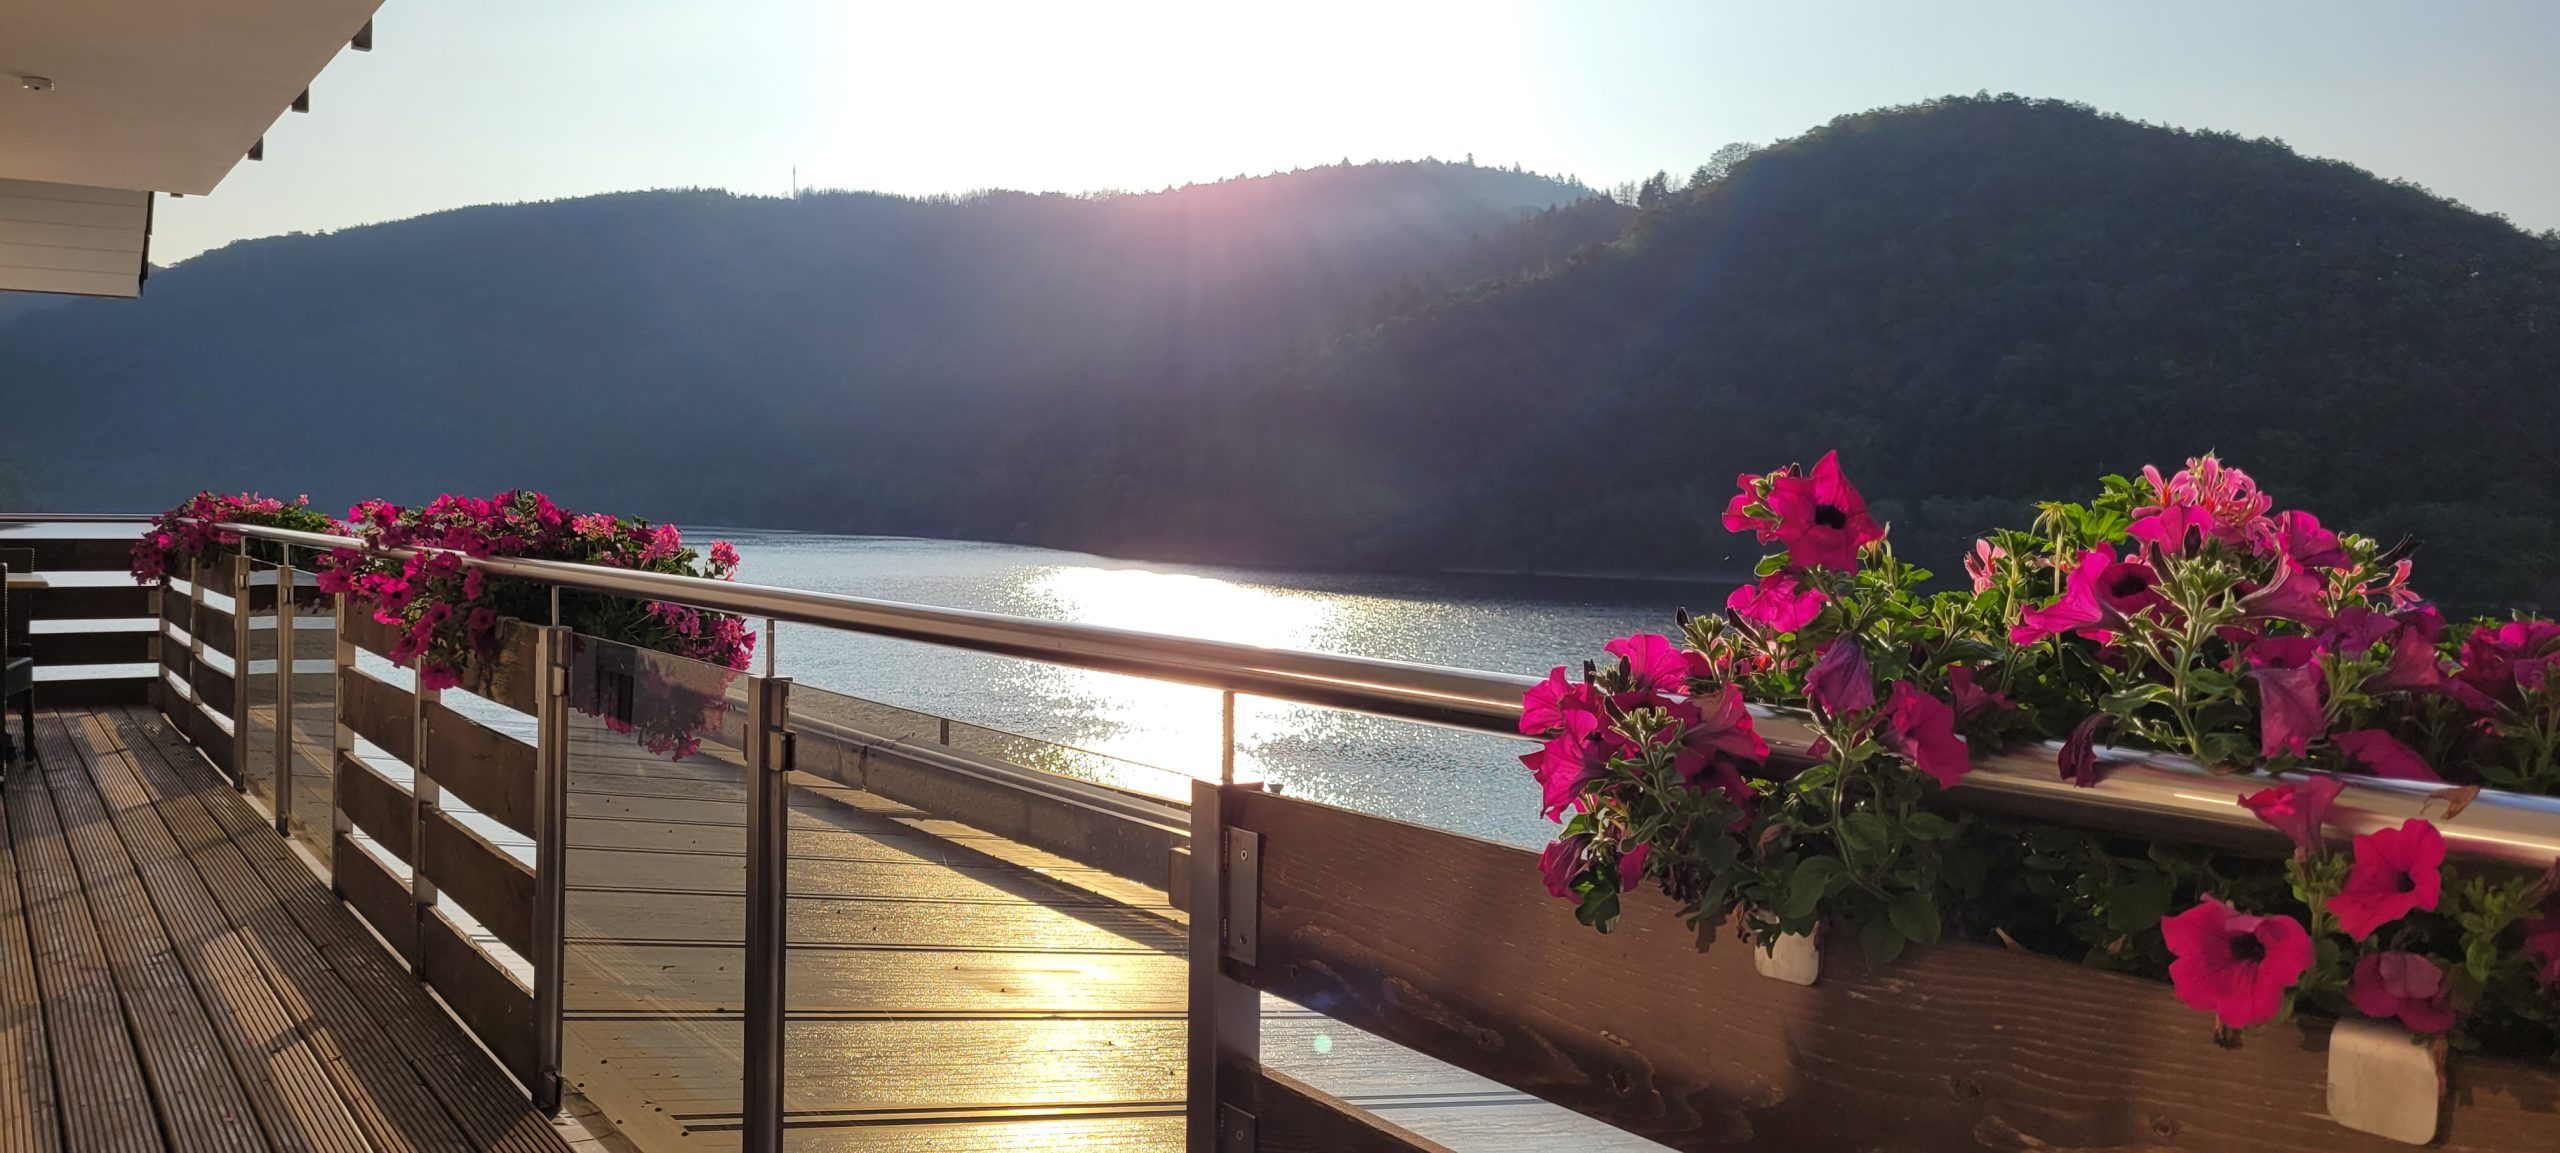 Balcony with flowers overlooking water and mountains. 